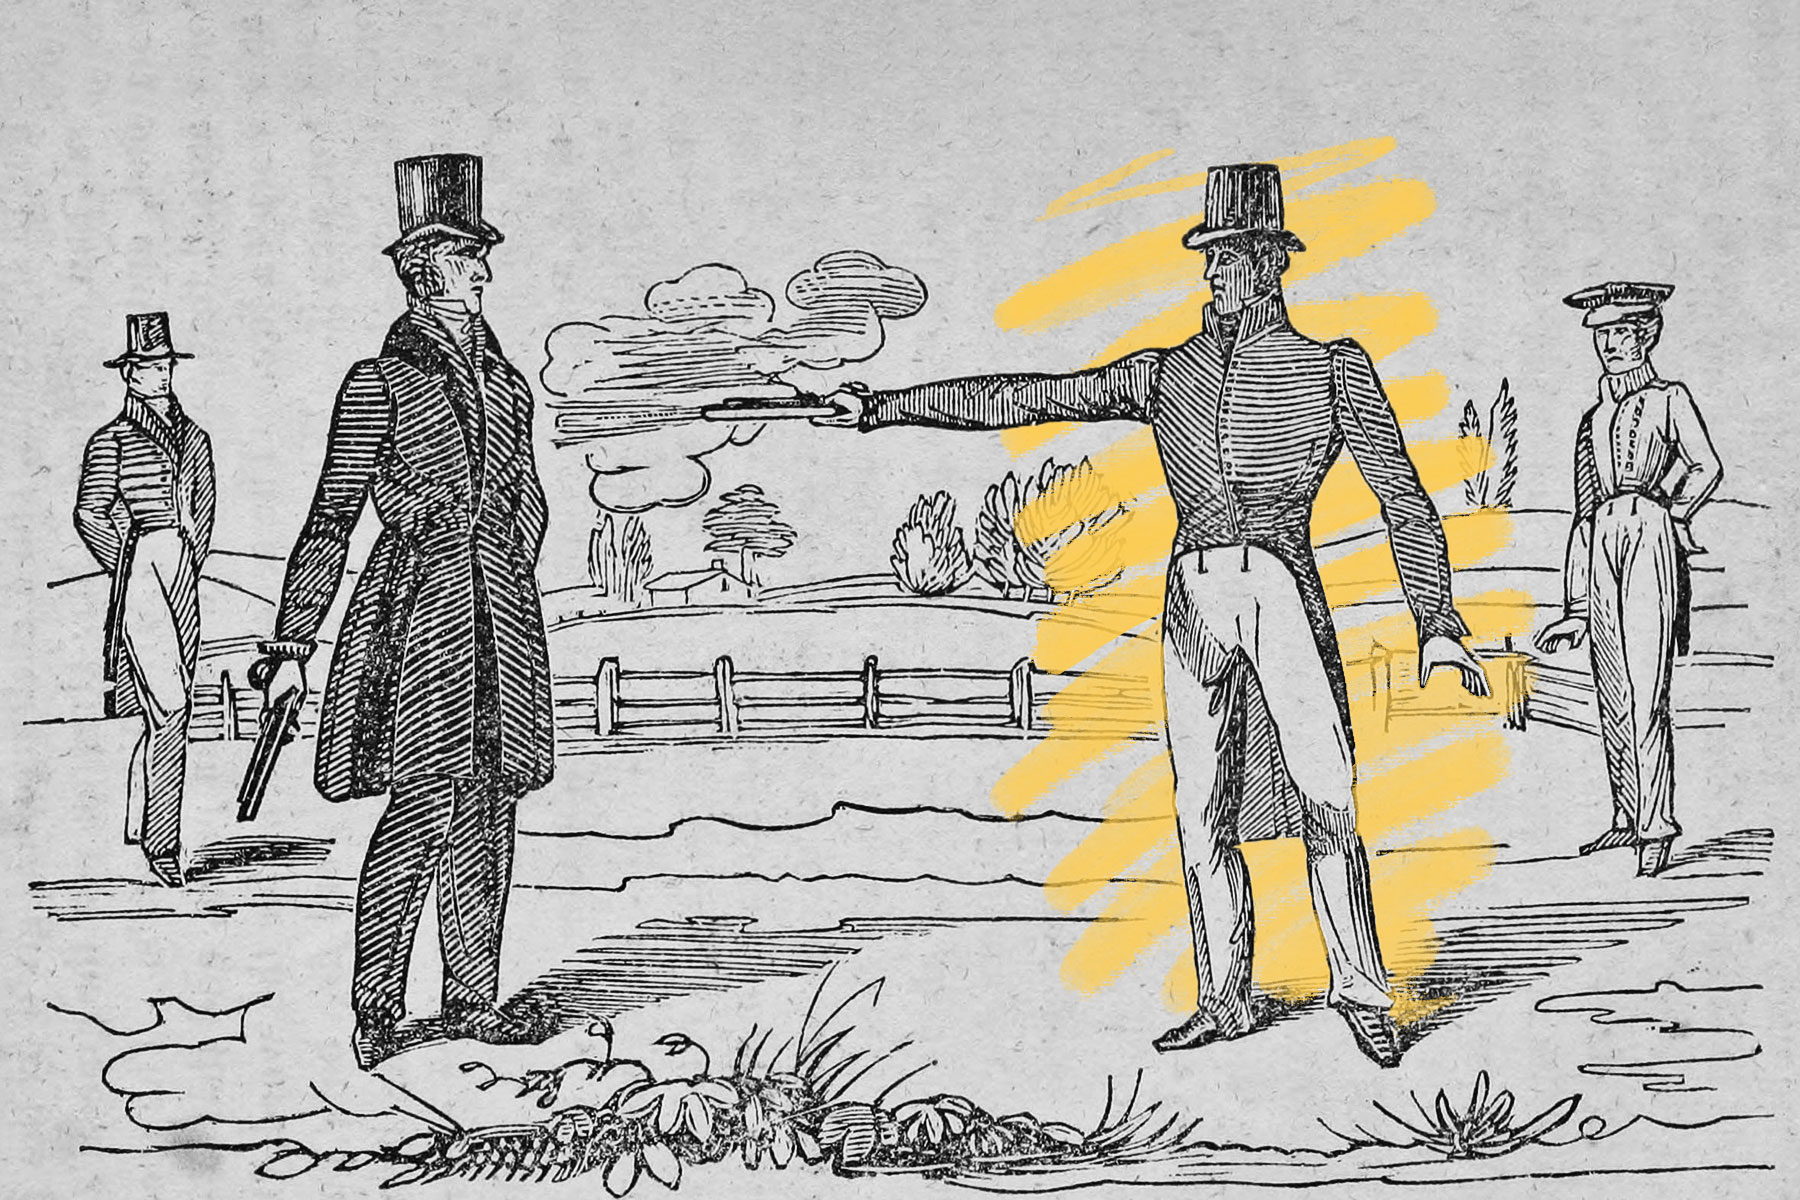 Andrew Jackson in a duel